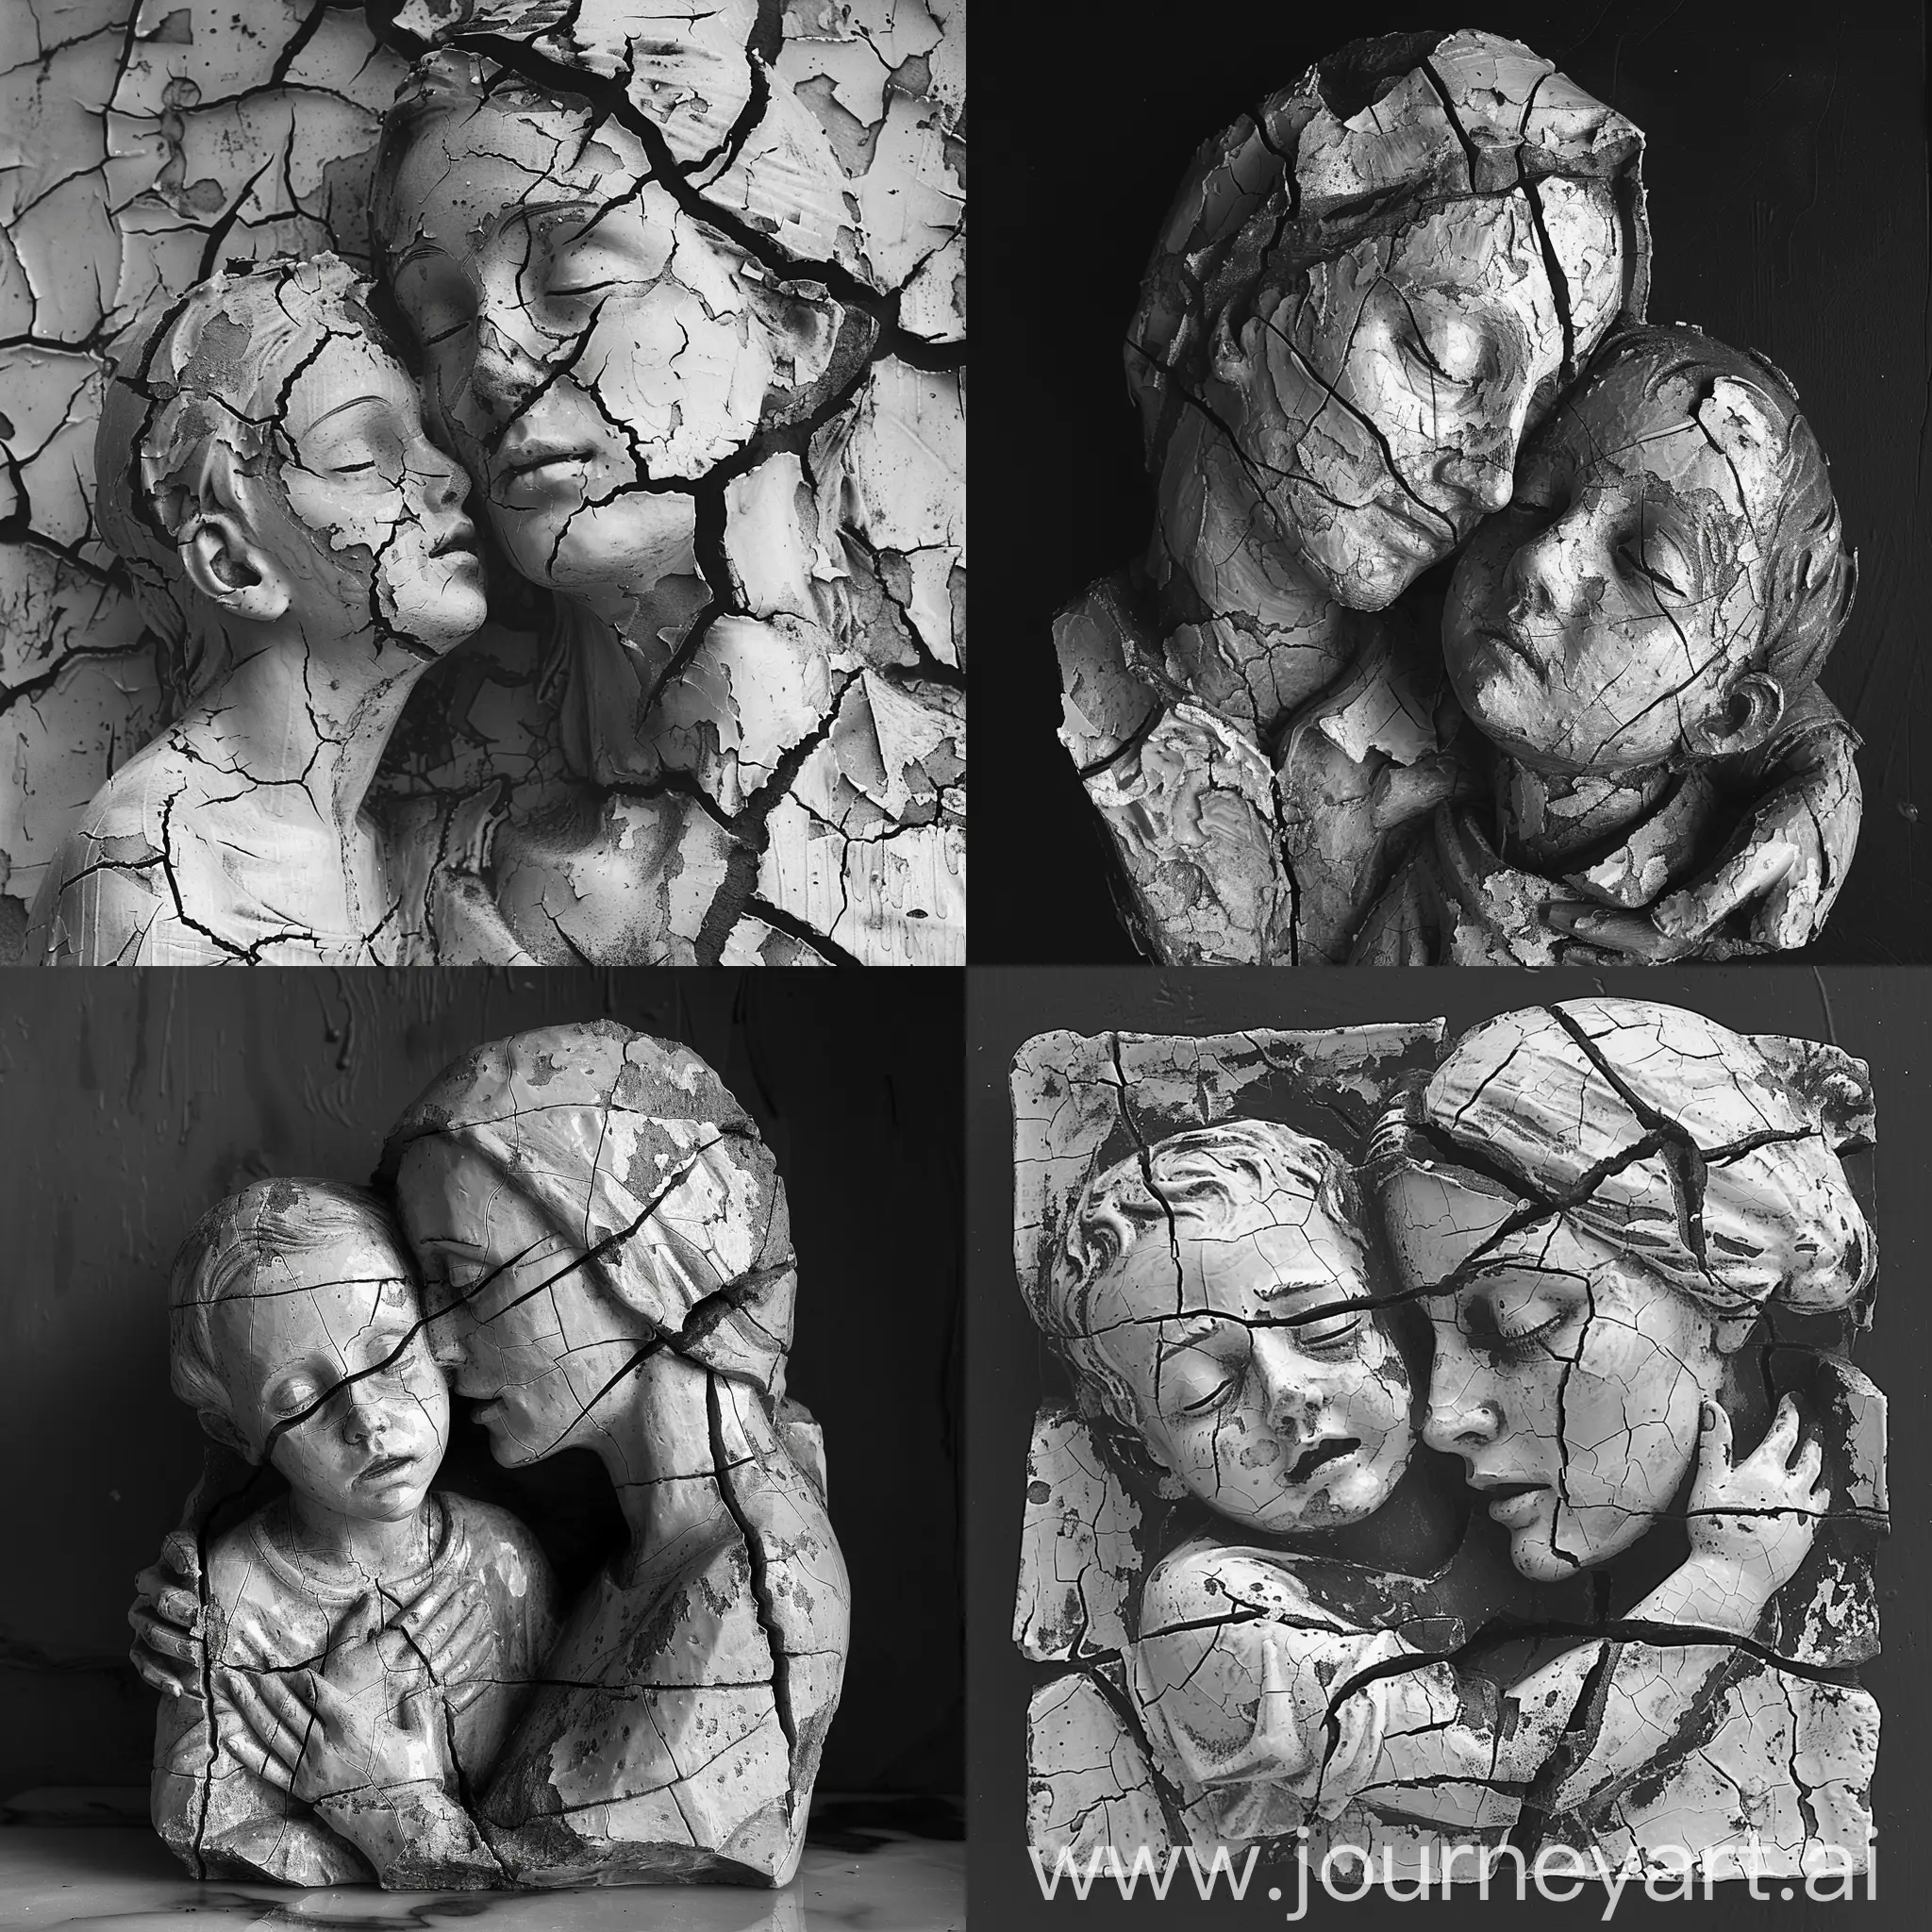 paint me a tempera style, black and white, stone sculpture of an mother and sick child, cracked and chipped by the ravages of time